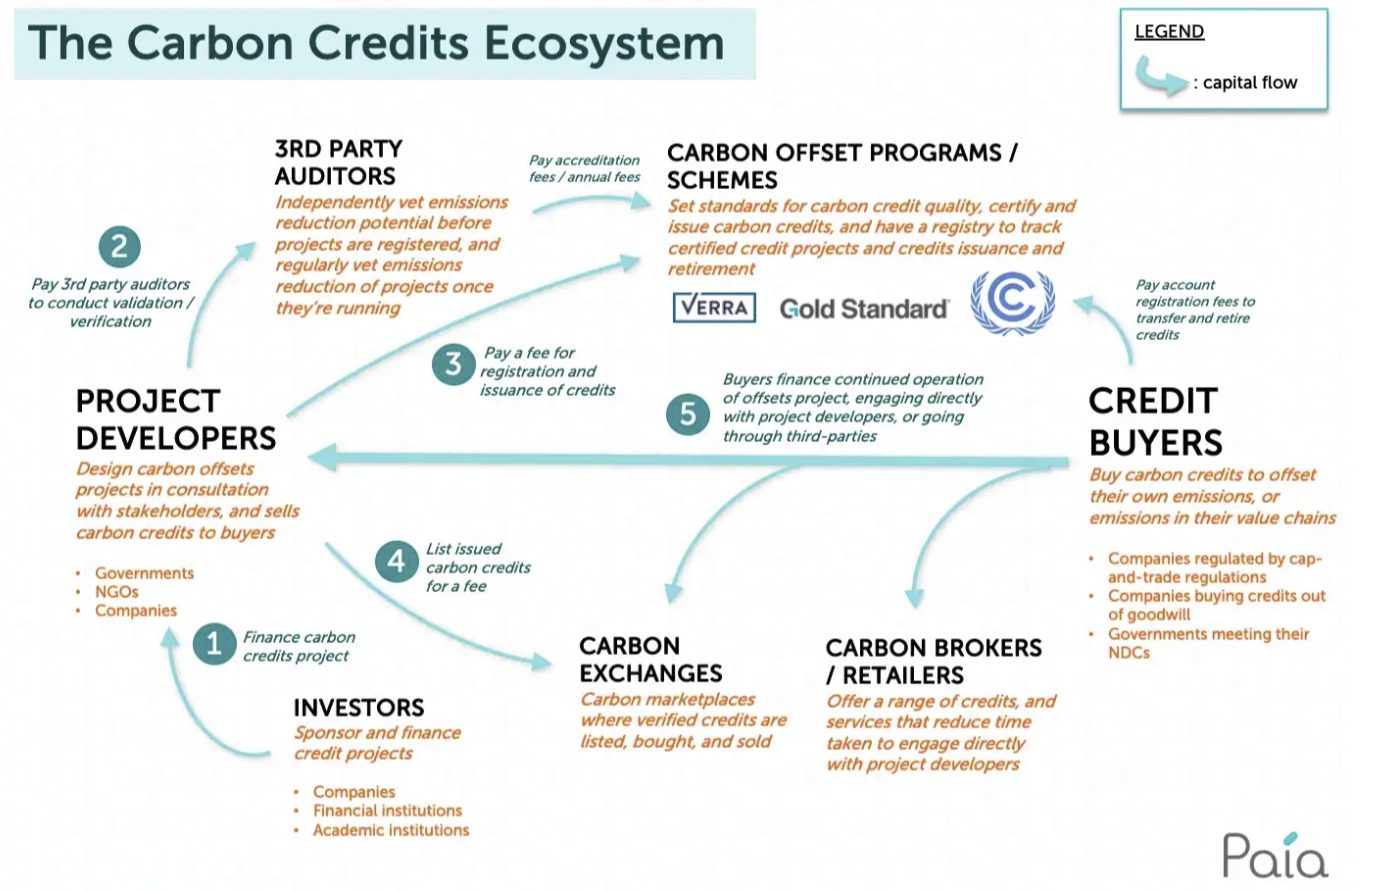 Figure 1: The Carbon Credits Ecosystem illustrated, Source Paia(https://paiaconsulting.com.sg/carbon-offsets-and-credits-explained/).